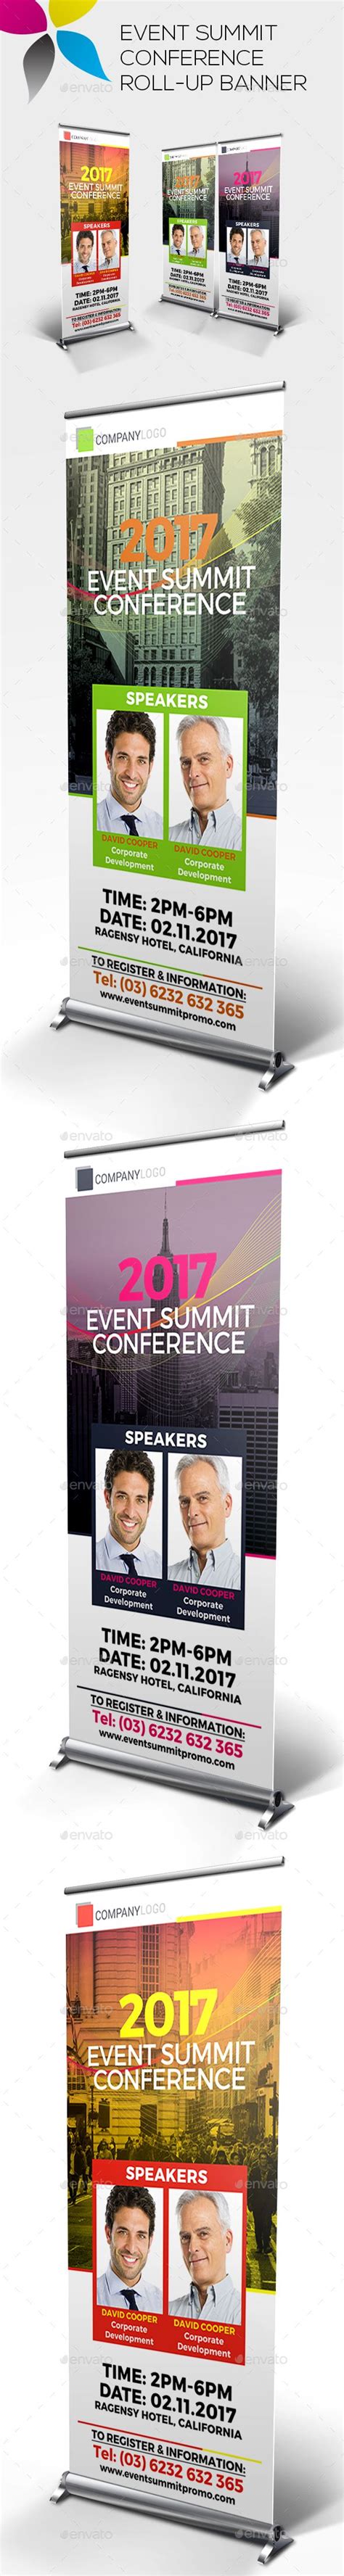 Event Summit Conference Roll Up Banner By Inddesigner Banner Size